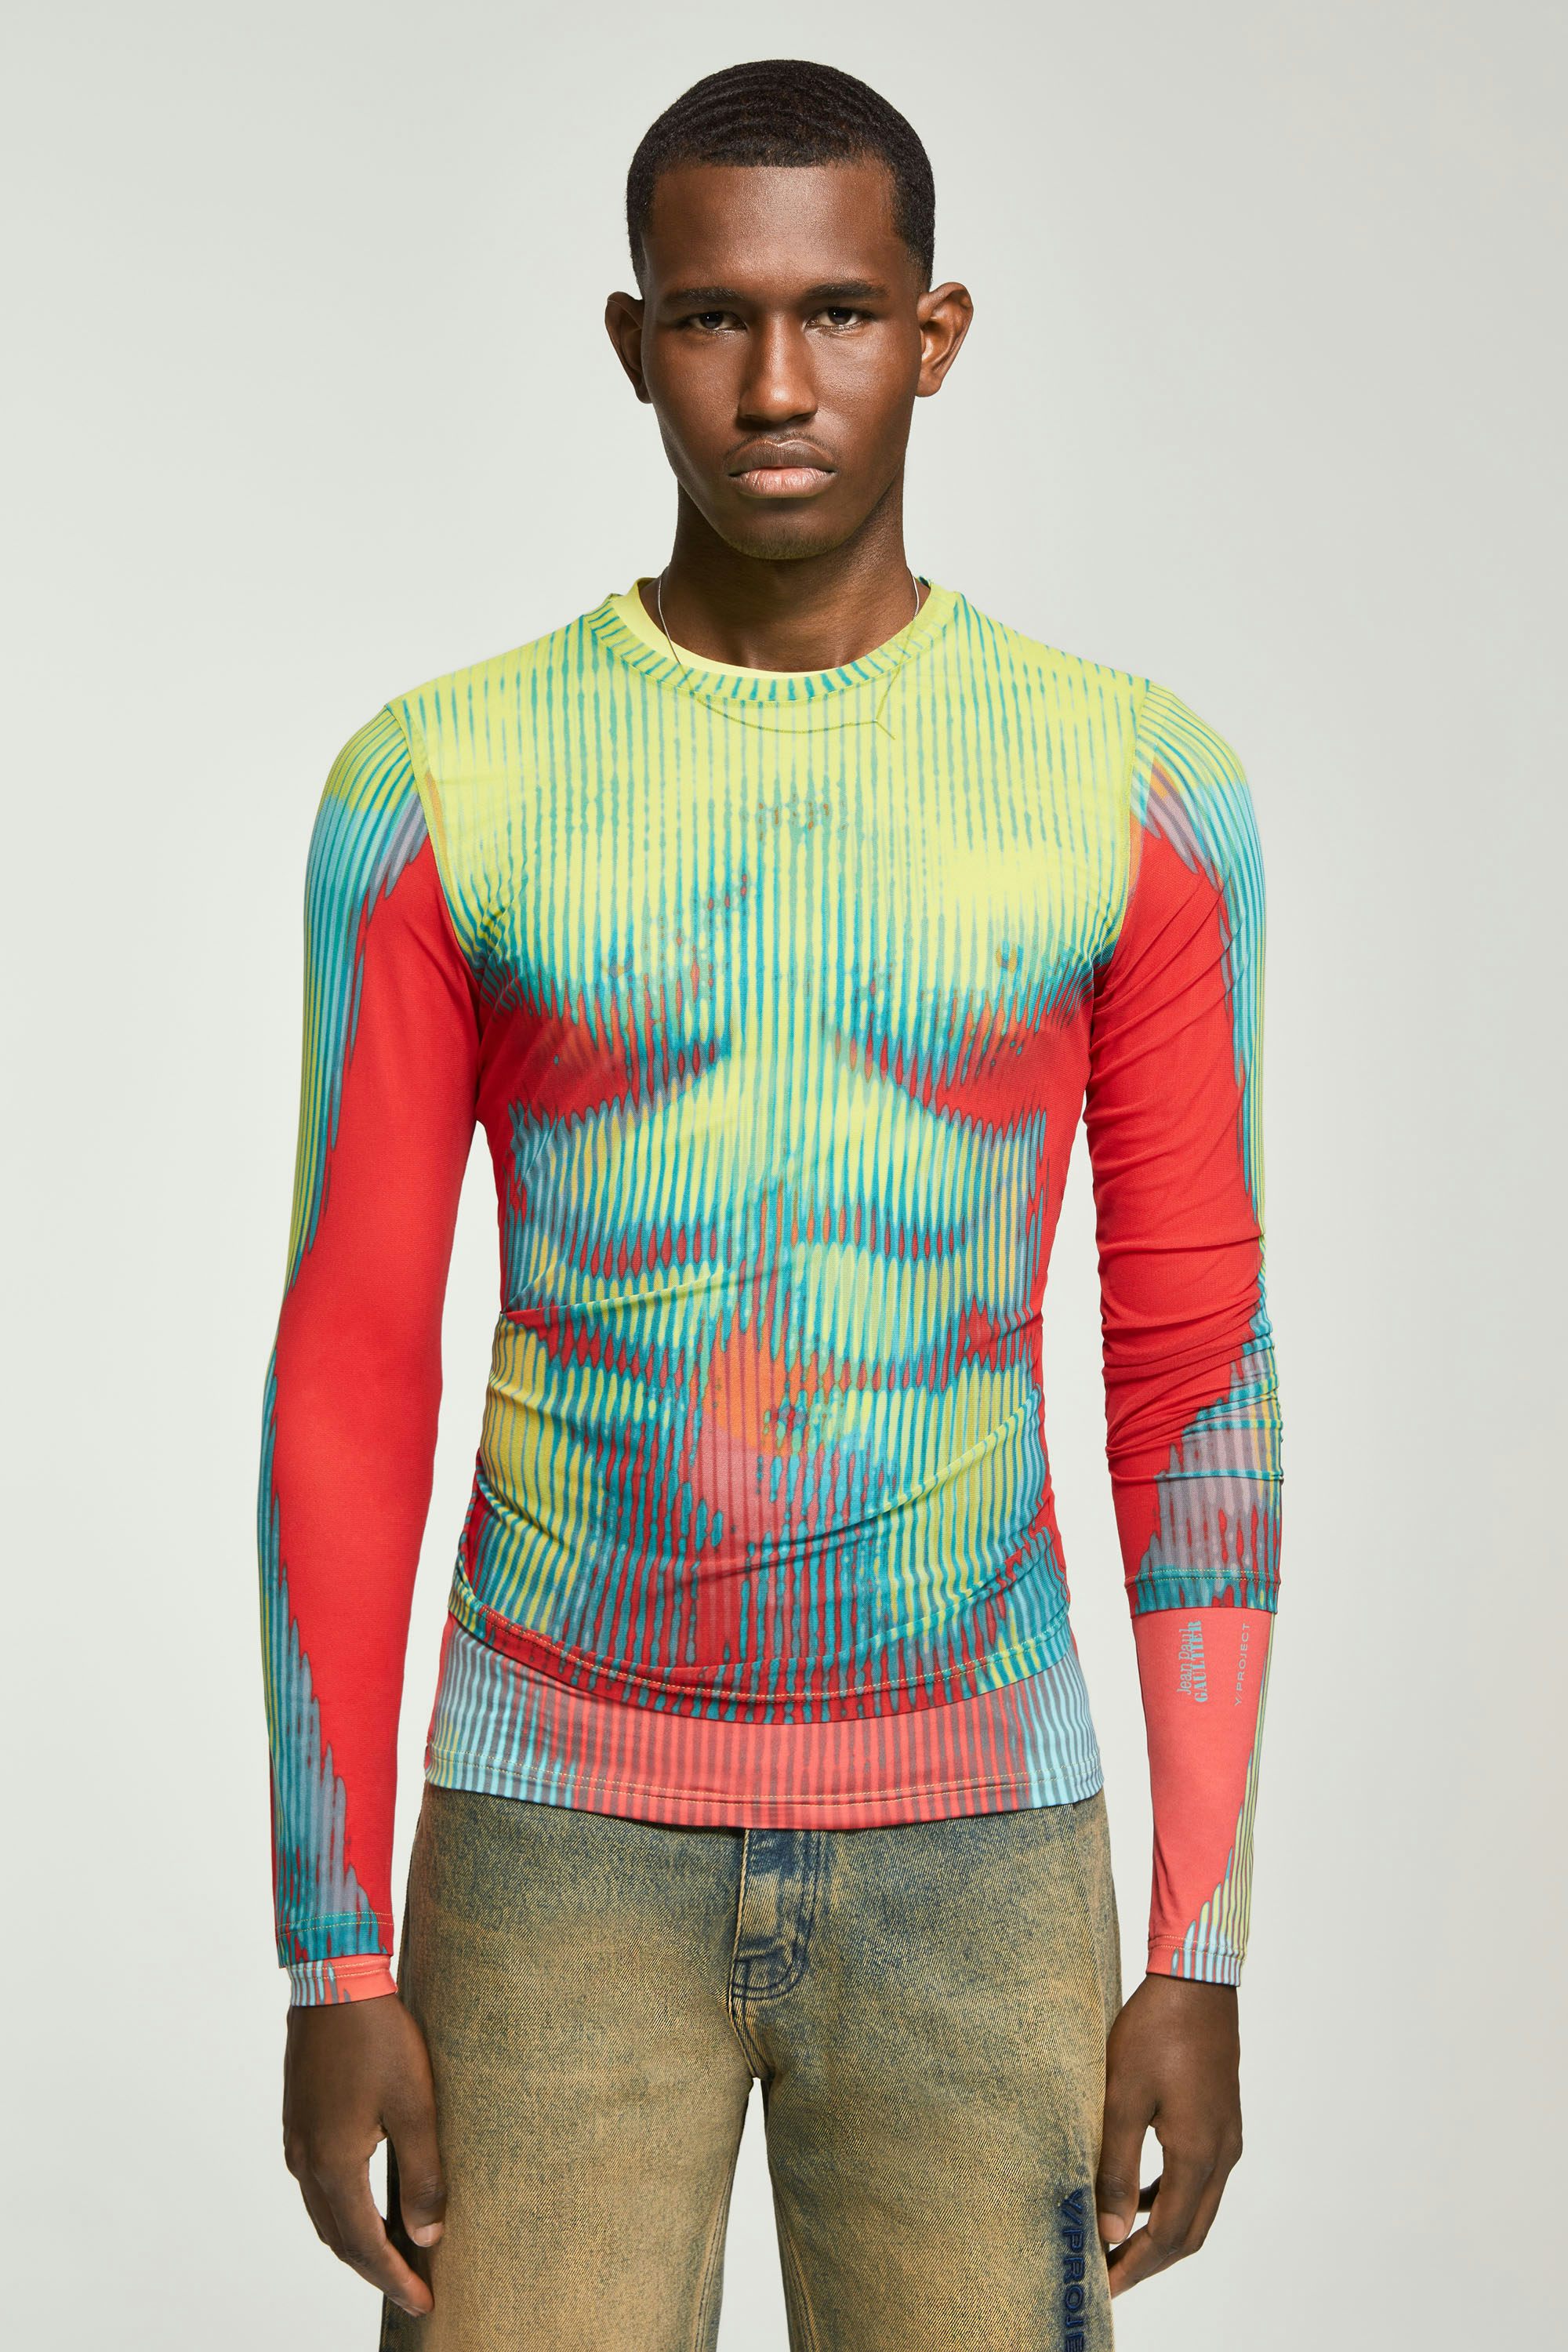 The Green & Red Body Morph Top by Jean Paul Gaultier x Y/Project